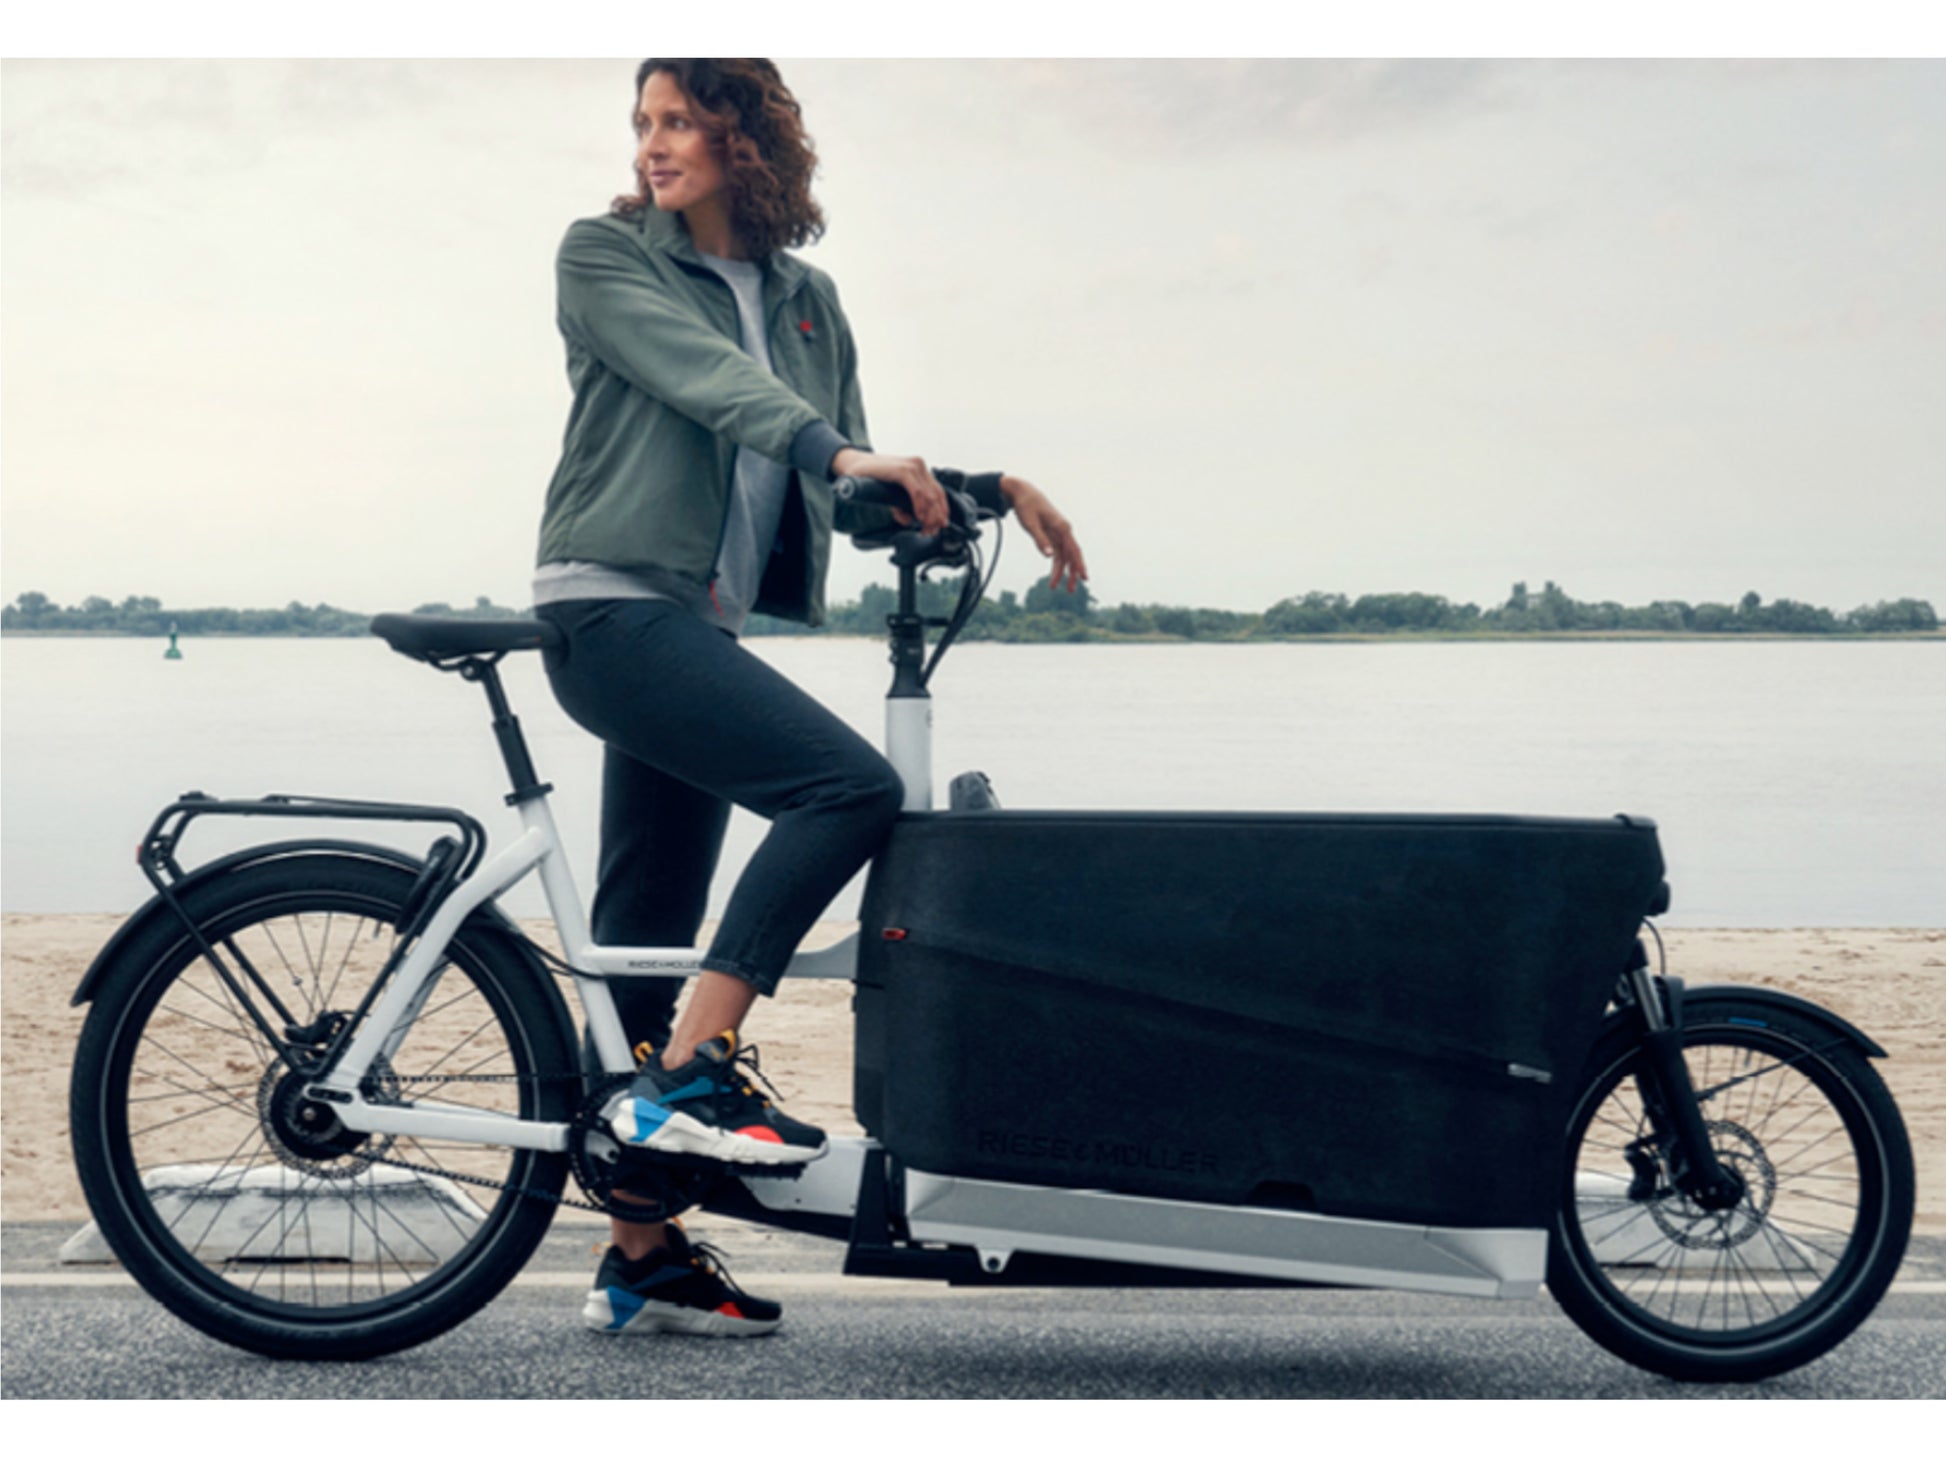 Riese & Muller Packster 70 Automatic cargo eMTB hardtail woman standing with bike by waterfront